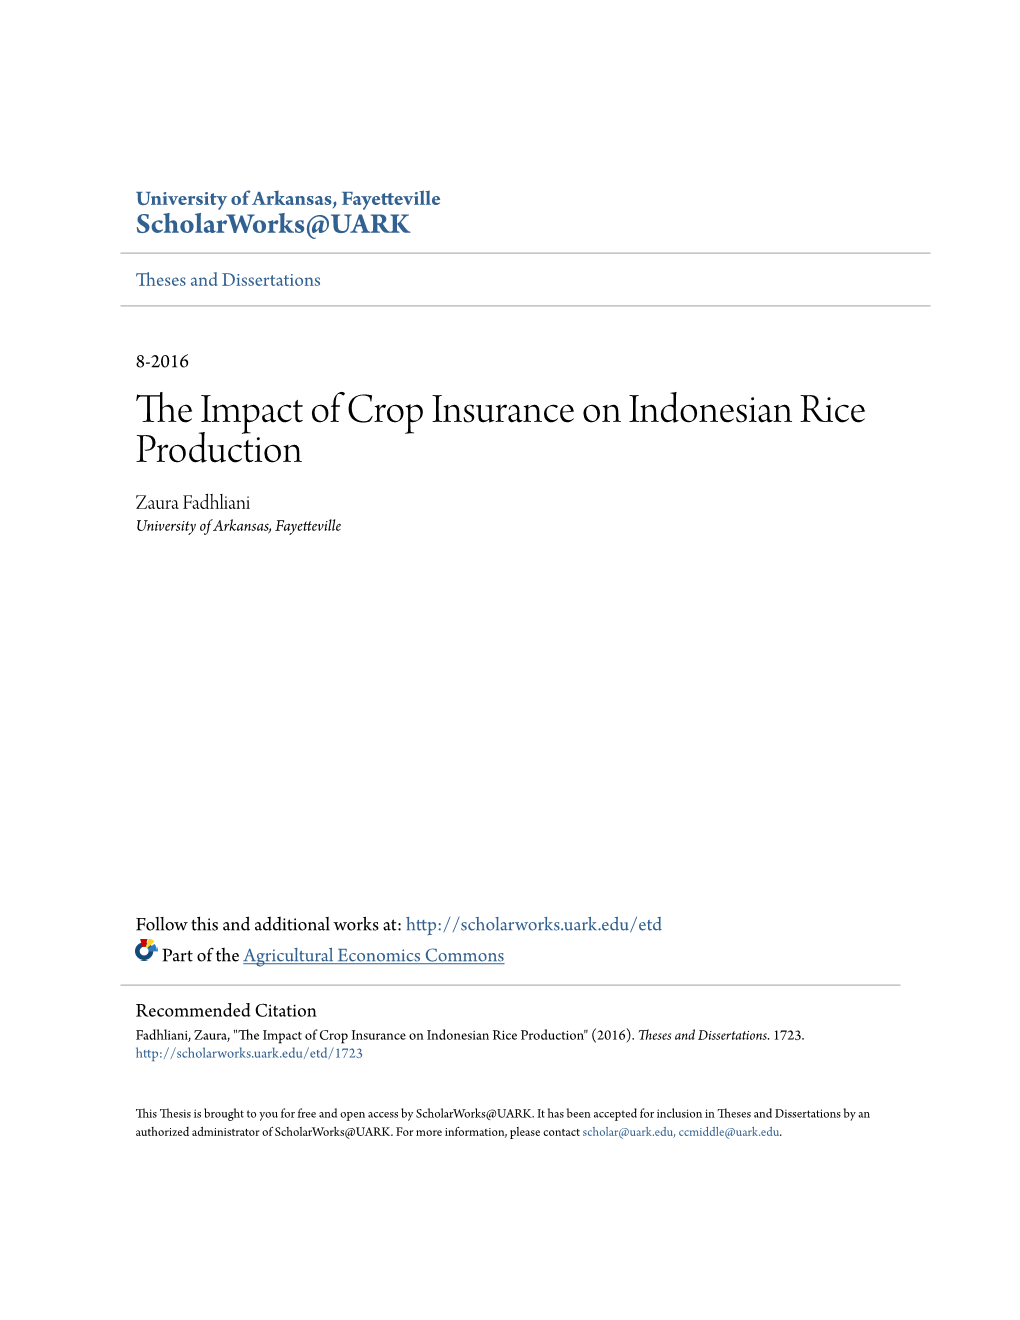 The Impact of Crop Insurance on Indonesian Rice Production